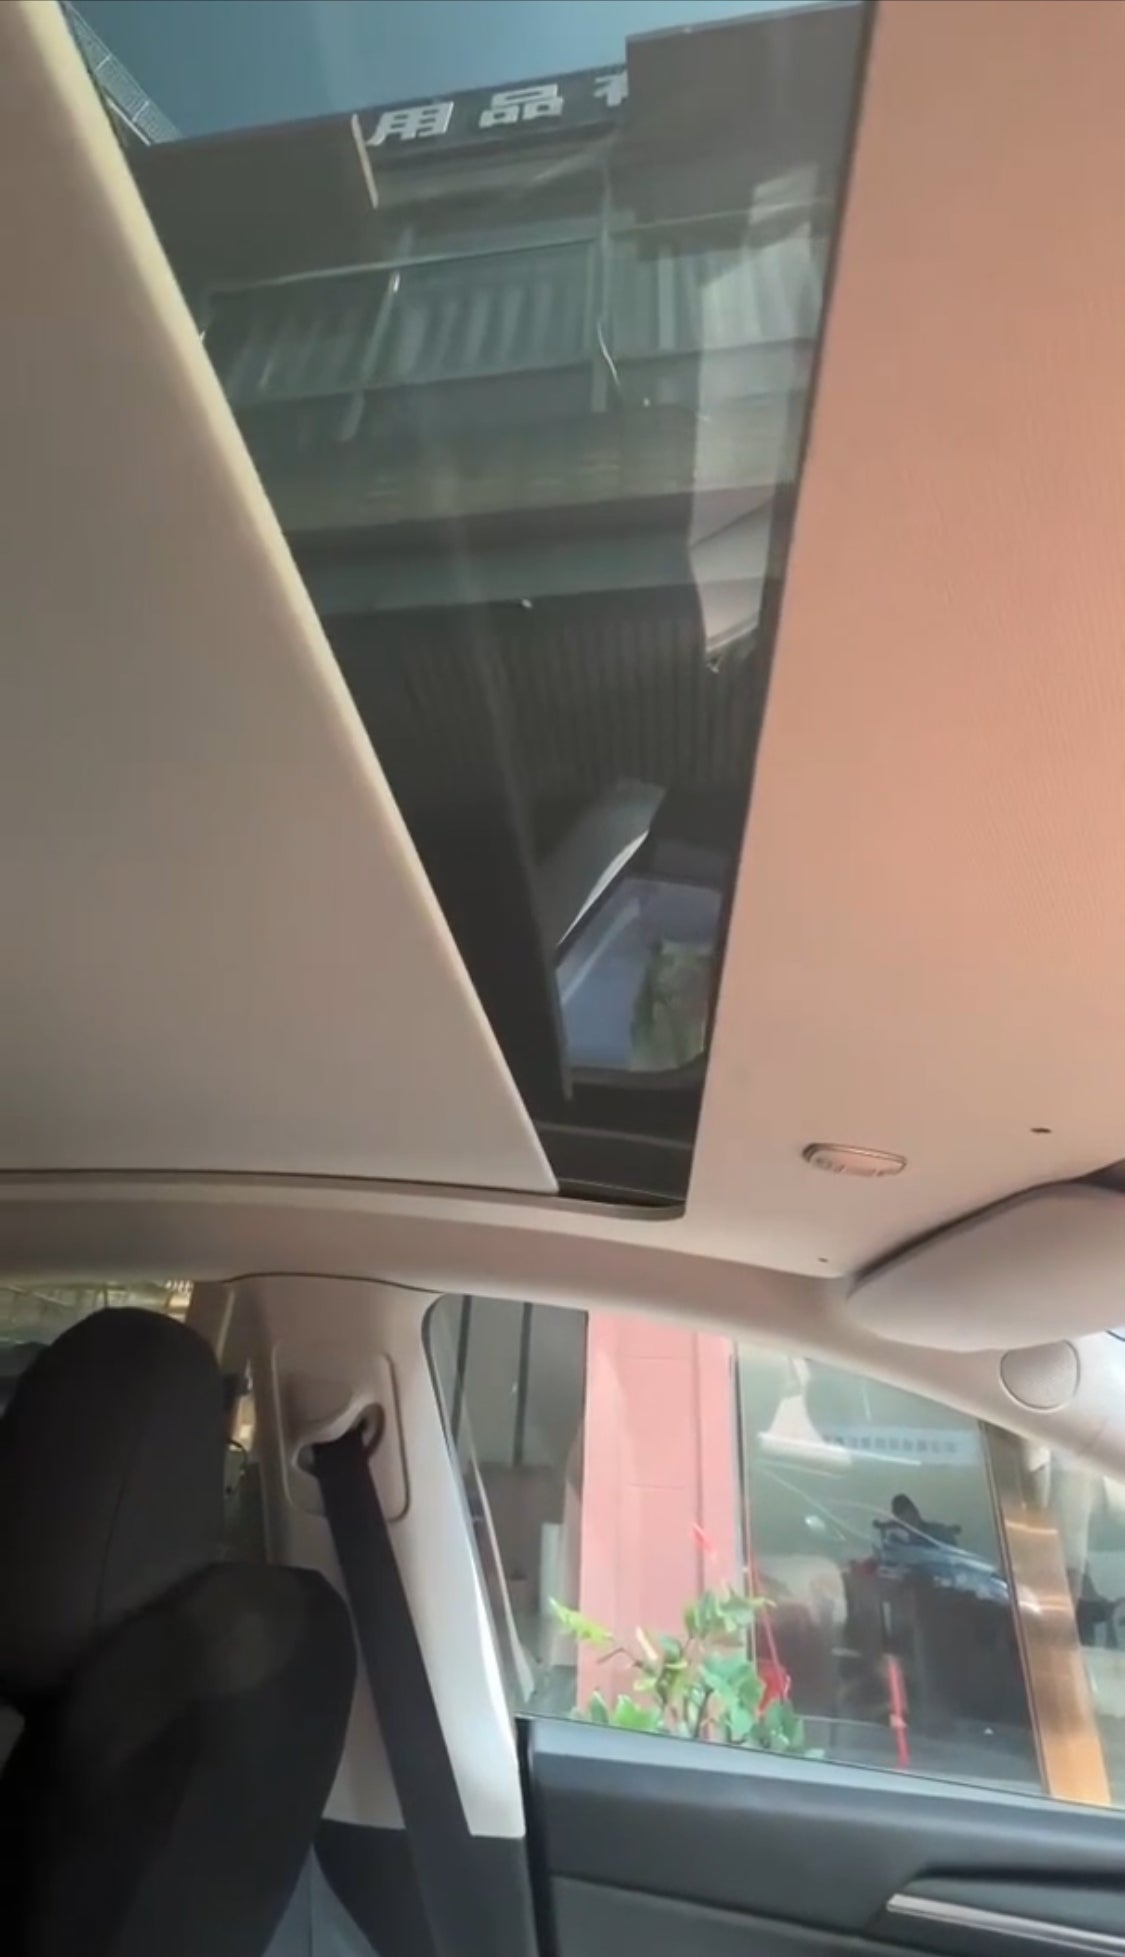 Model Y Electric Automatic Retractable Roof Sunshade